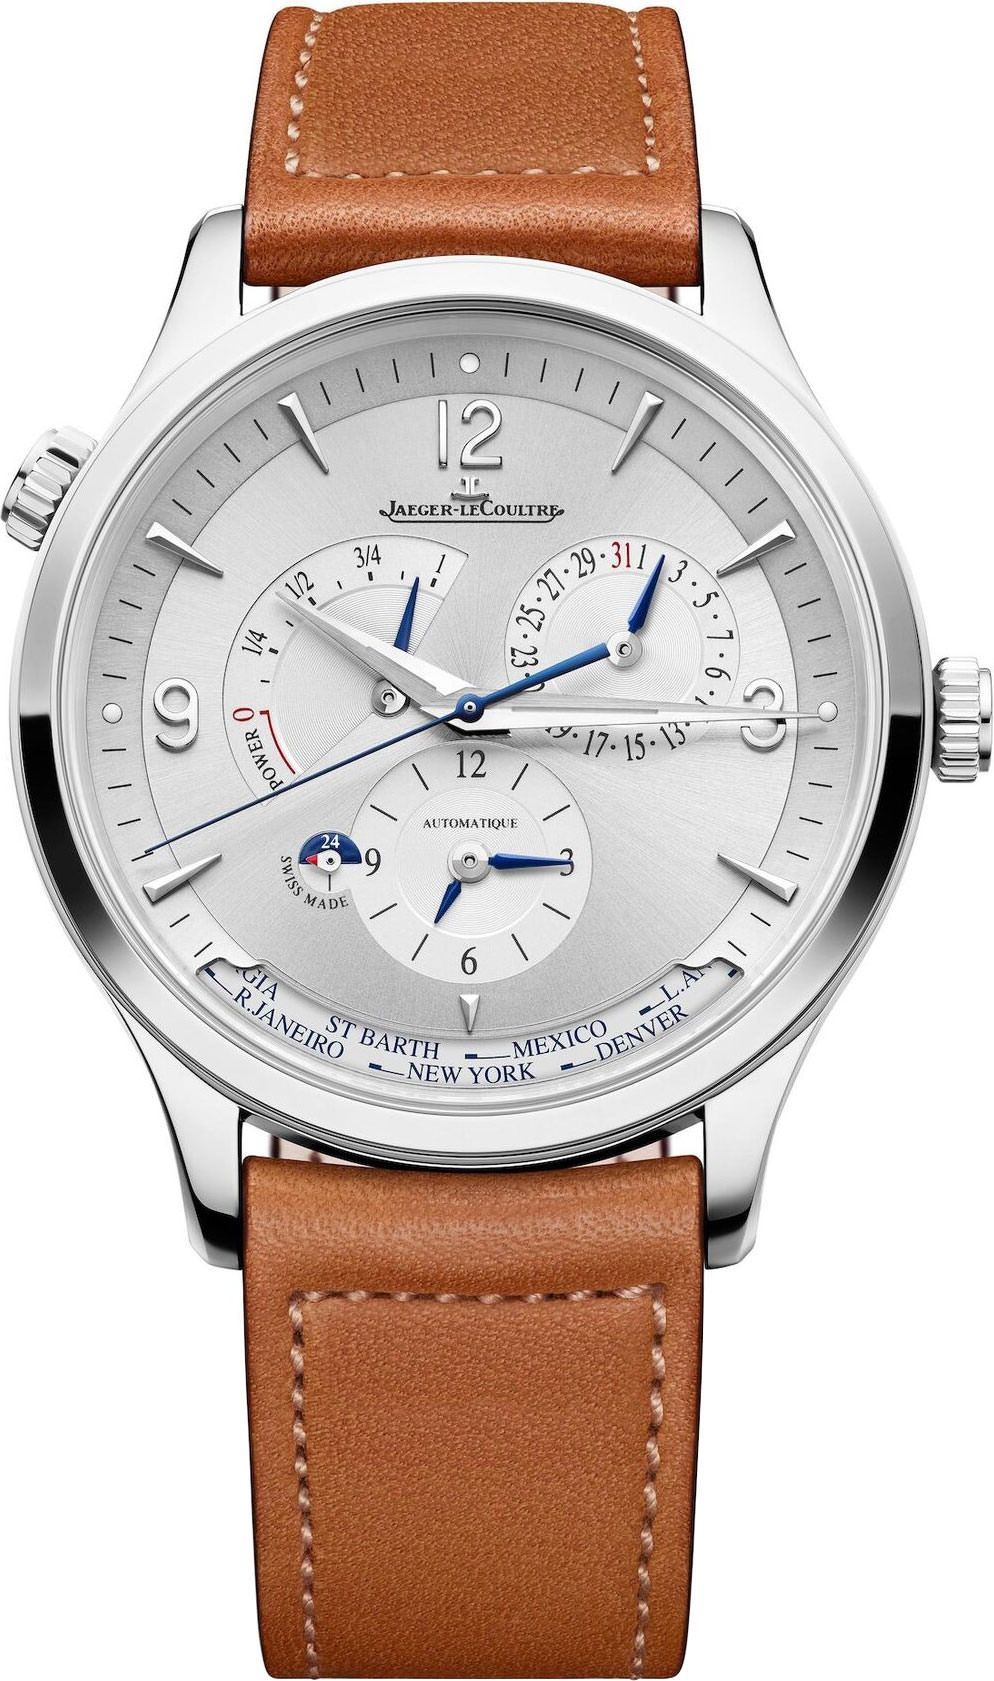 Jaeger-LeCoultre Master Control 40 mm Watch in Silver Dial